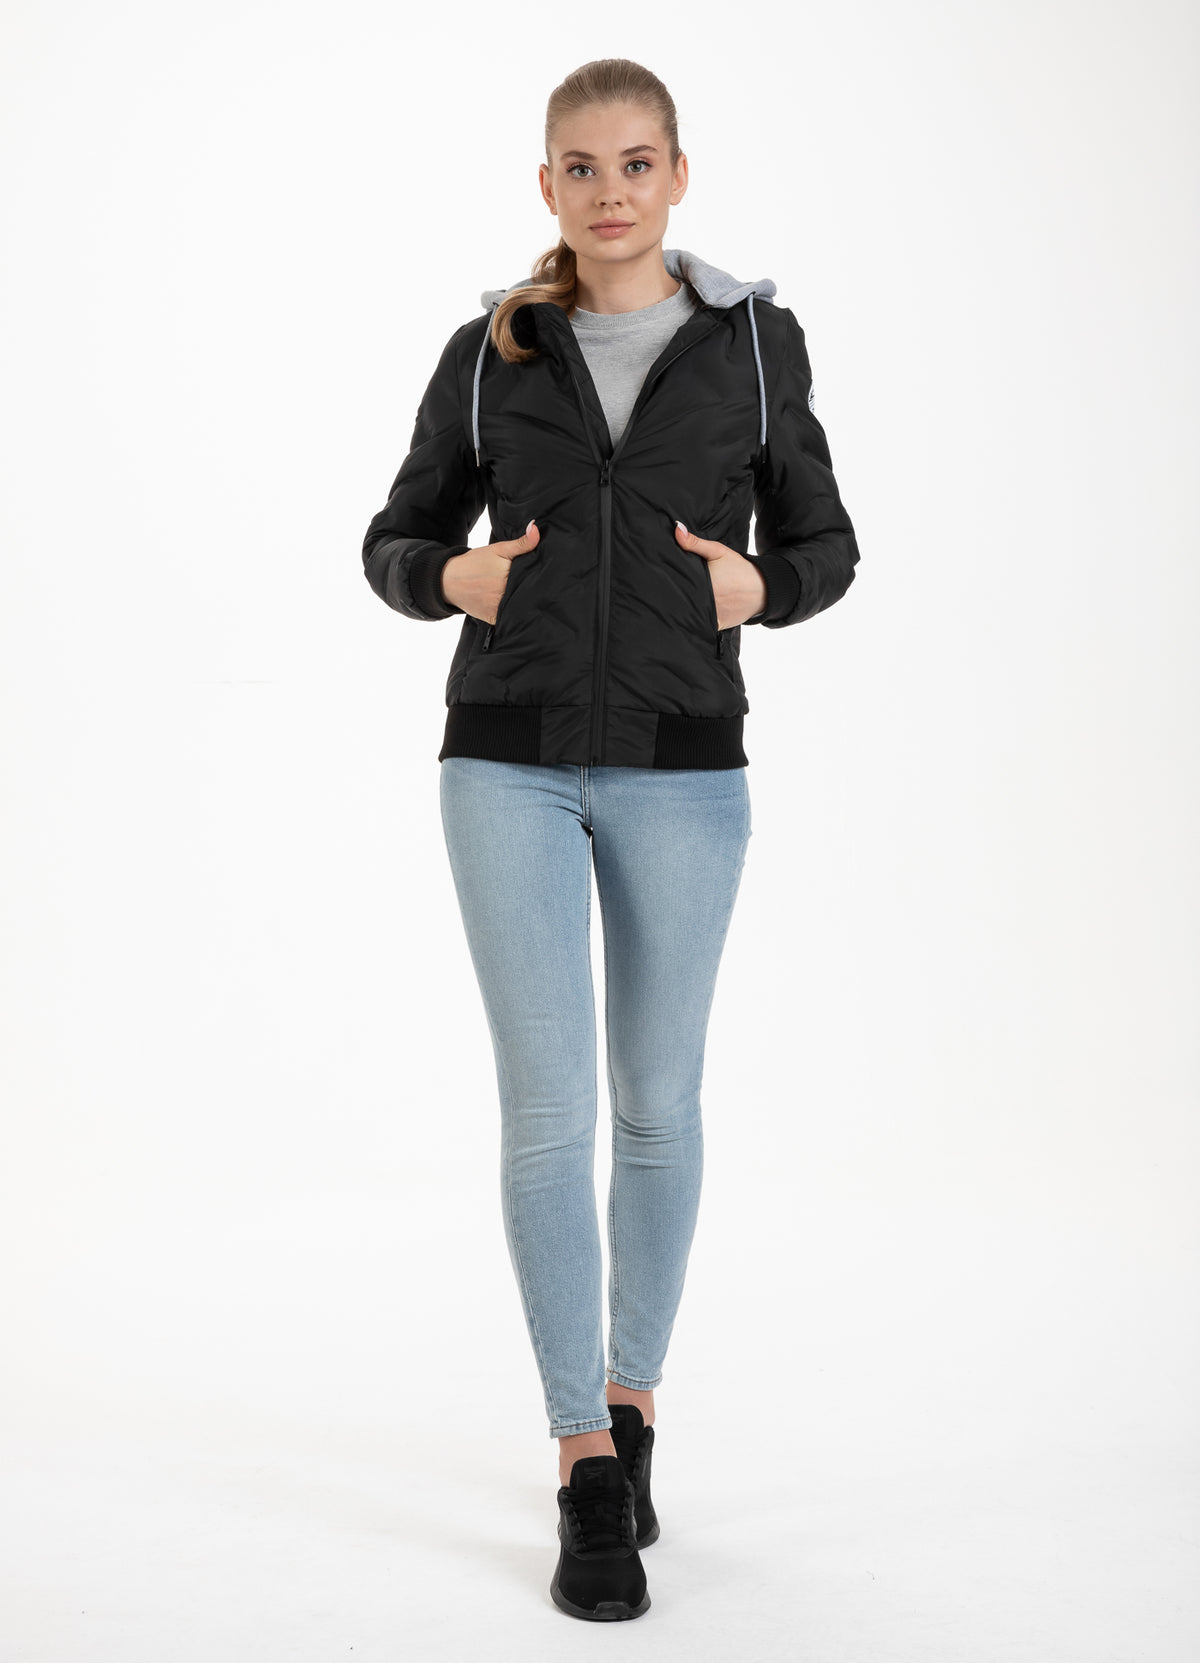 Women's Quilted Jacket Winchester Black - Pitbull West Coast International Store 